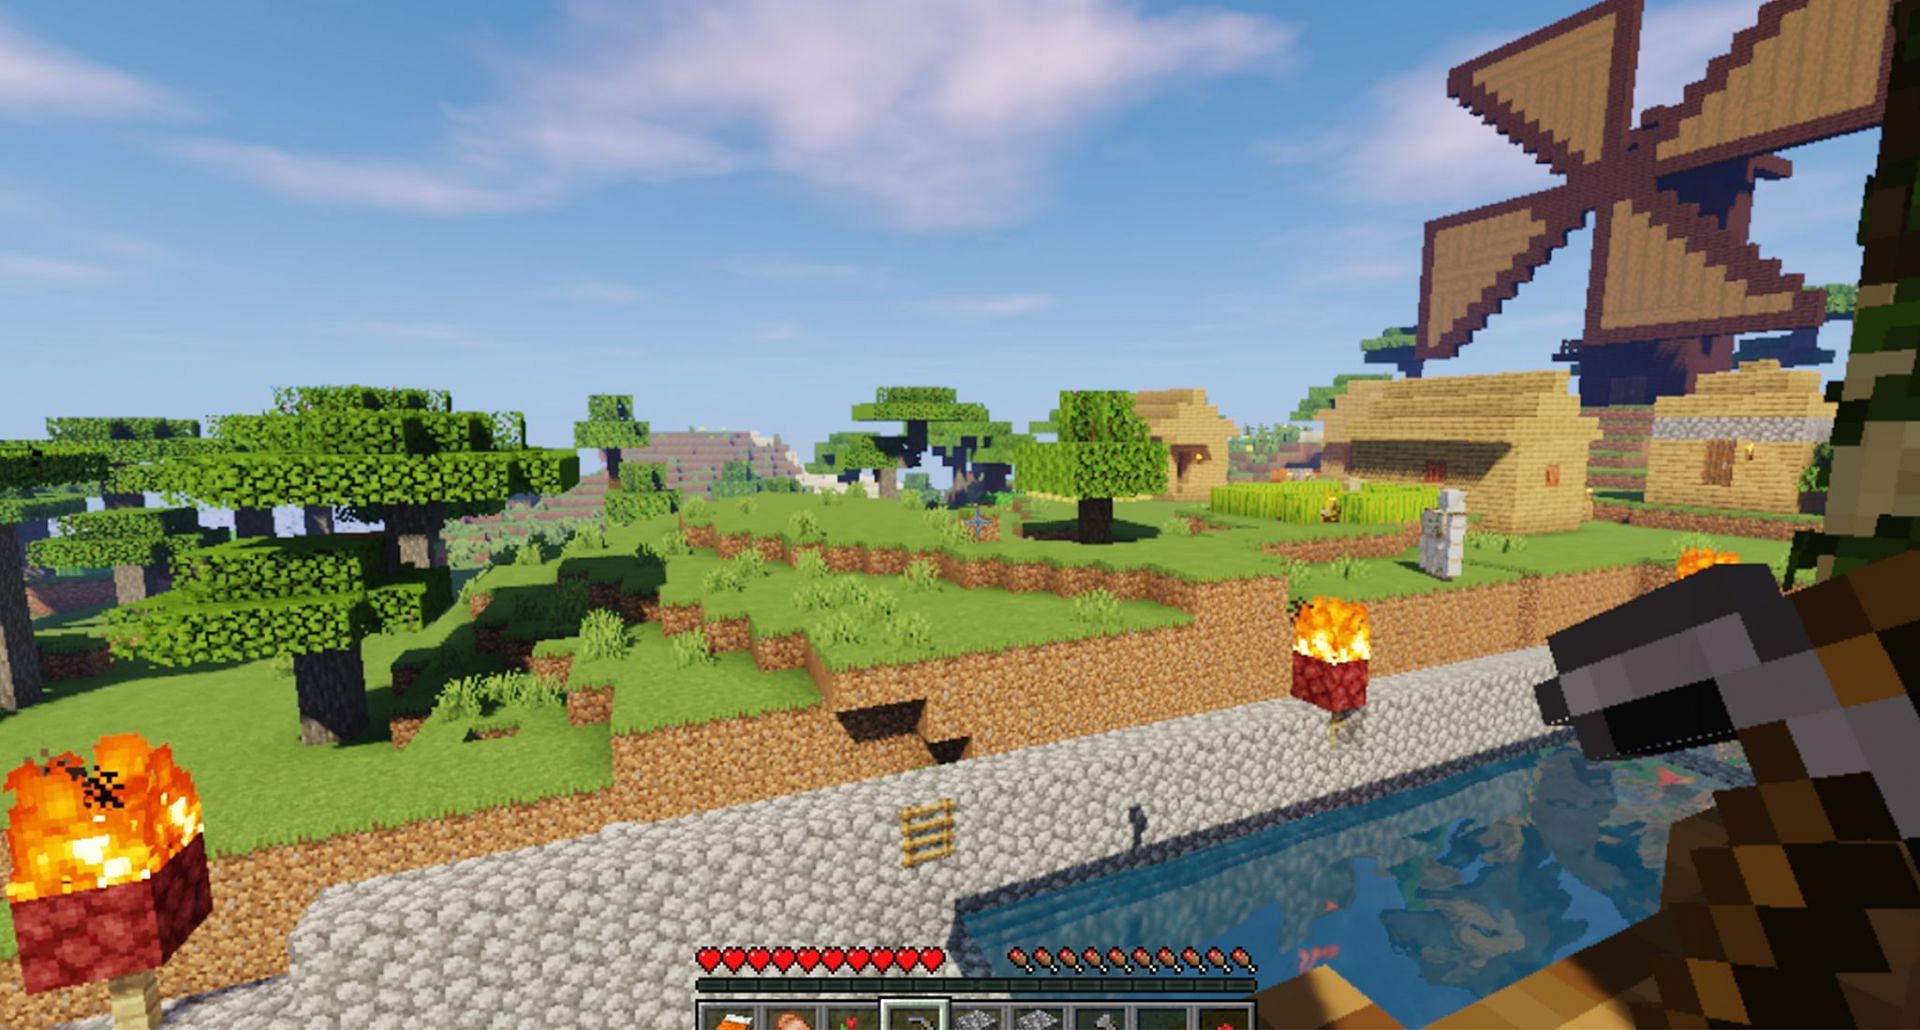 Mods improve the game experience in Minecraft (Image via Spectre Raider)